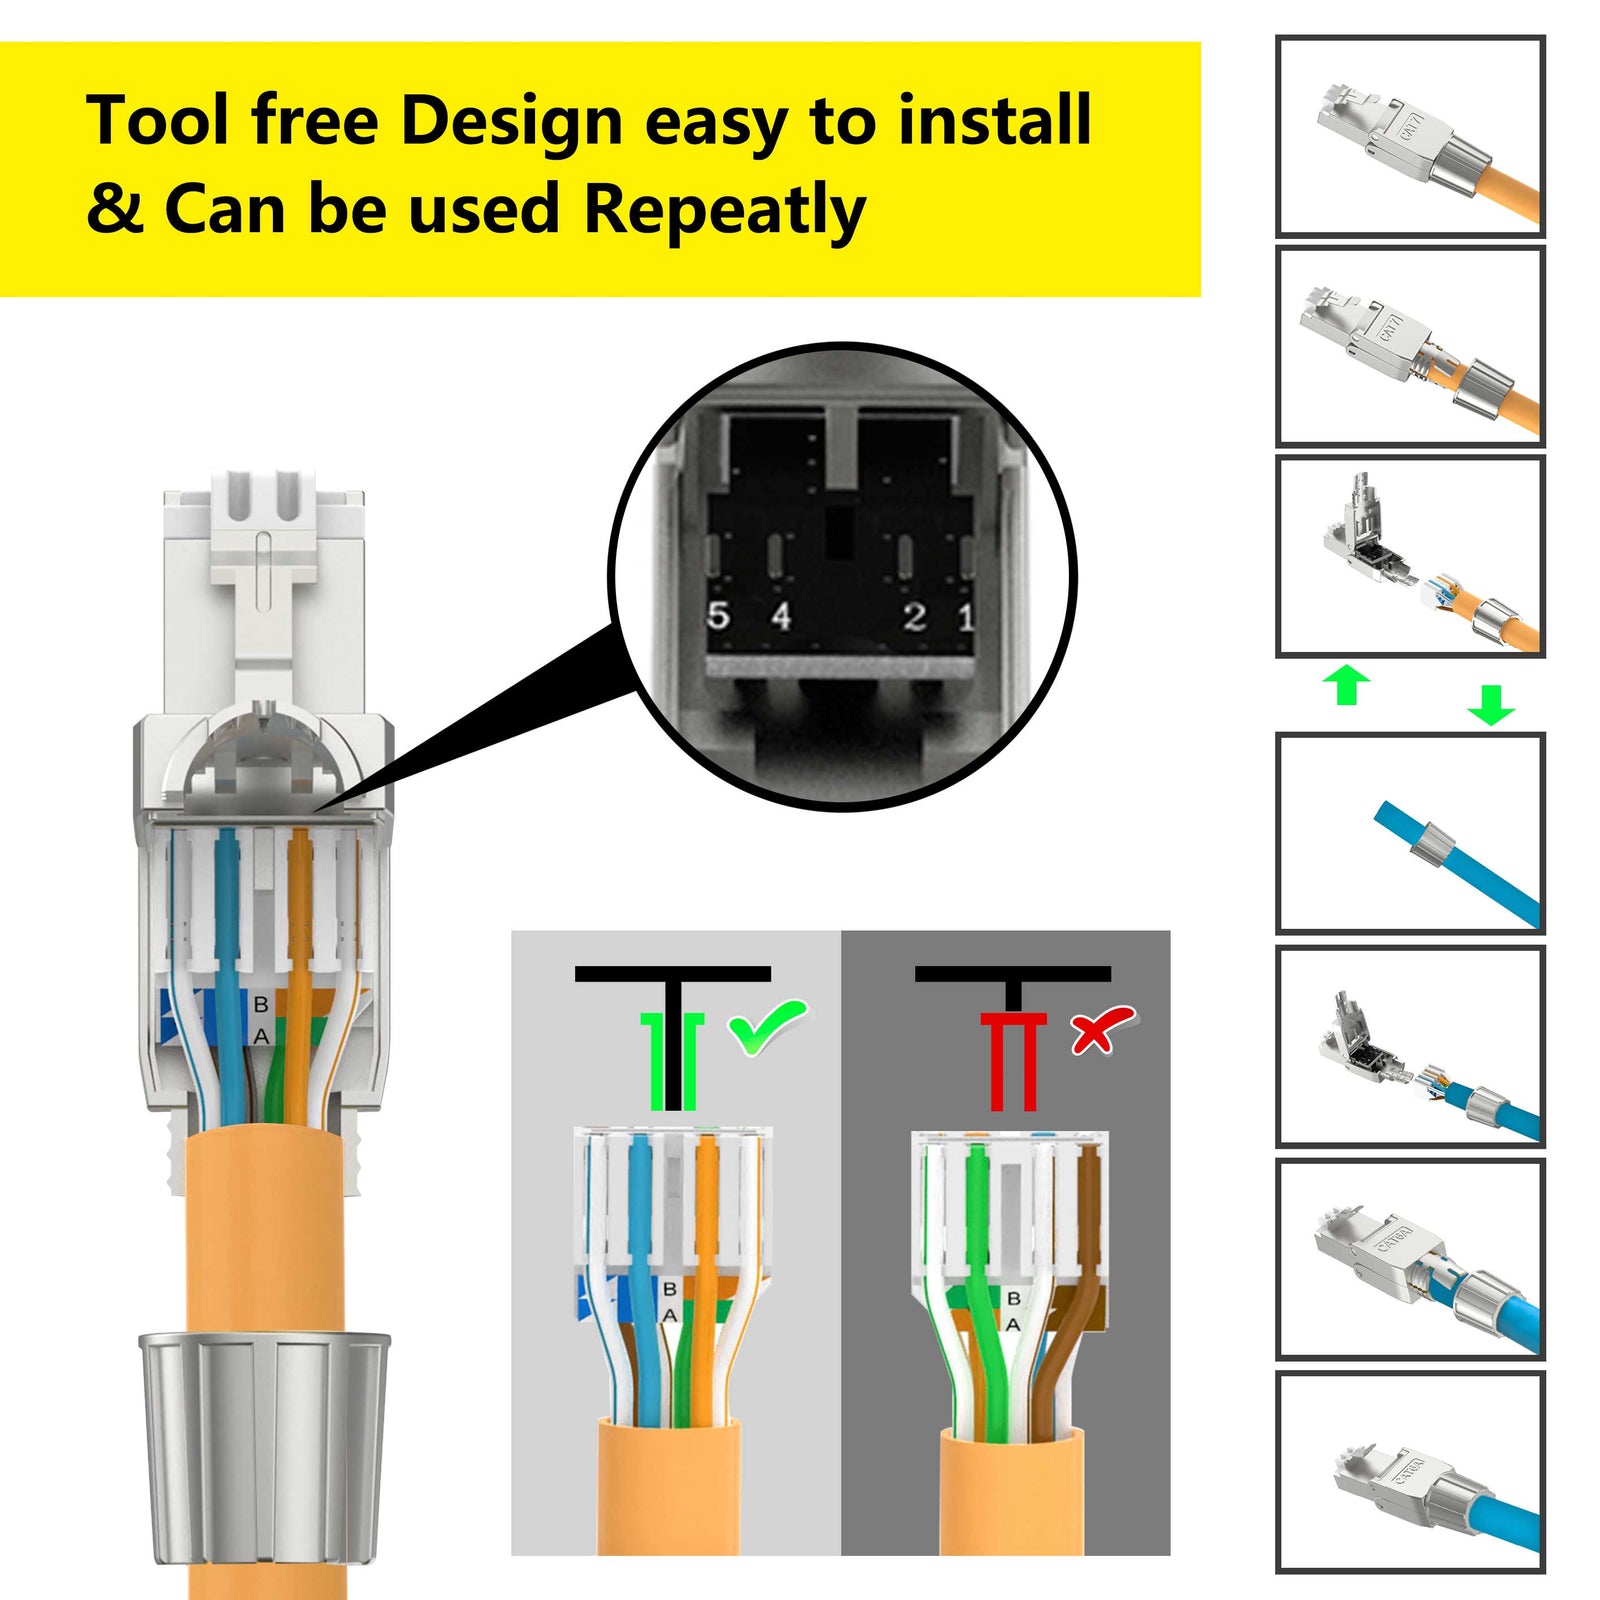 RJ45 Cat7 Connector Tool-Free Toolless RJ45 Termination Plug Reusable  Shielded for Ethernet Cables 10Gbps POE 4 Pack